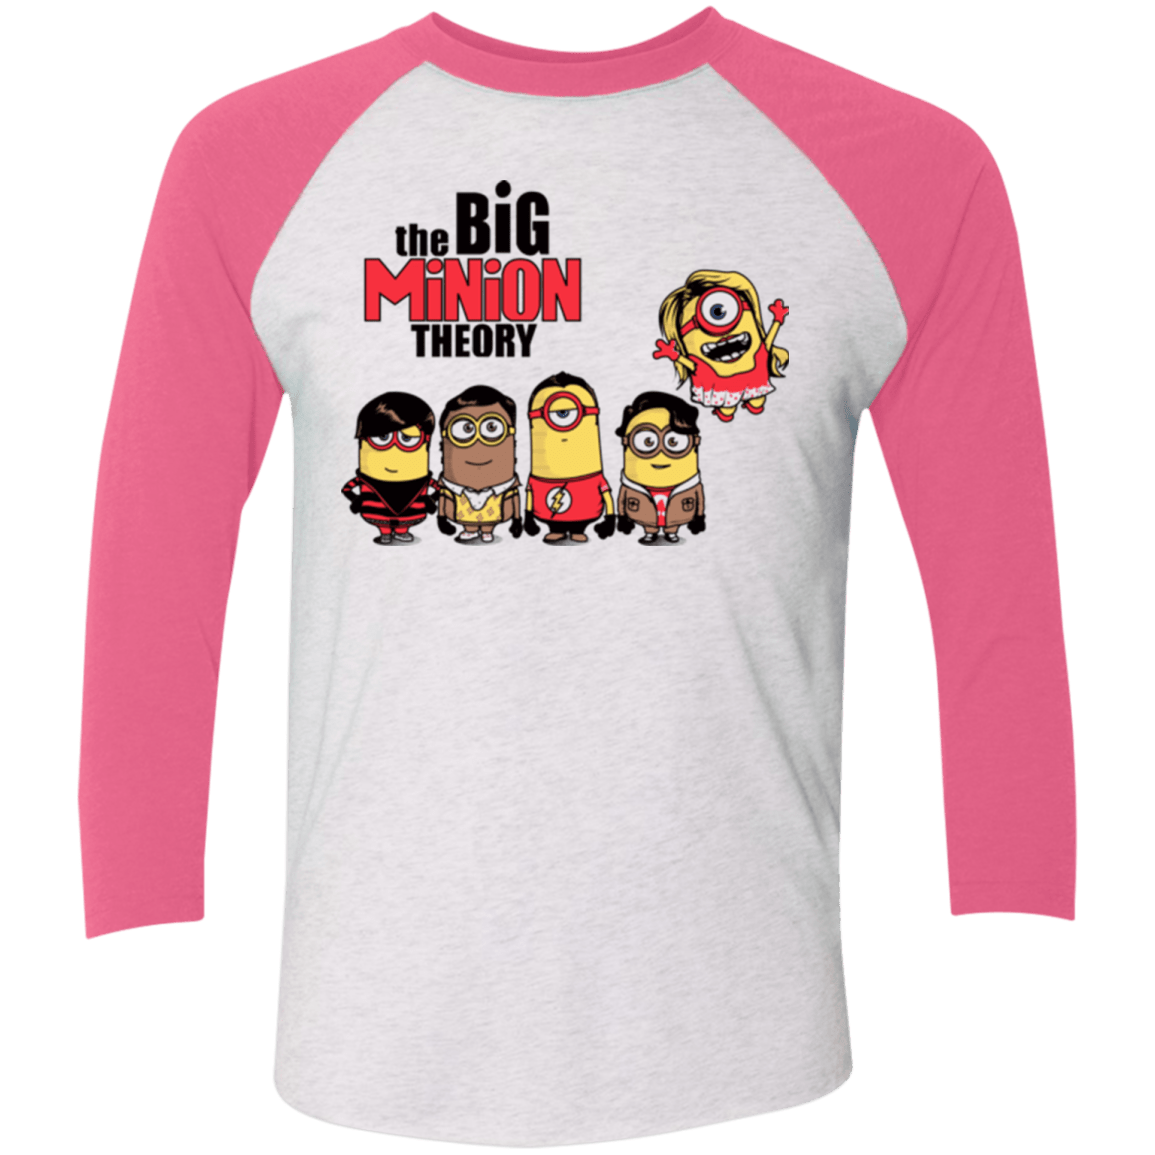 T-Shirts Heather White/Vintage Pink / X-Small THE BIG MINION THEORY Men's Triblend 3/4 Sleeve